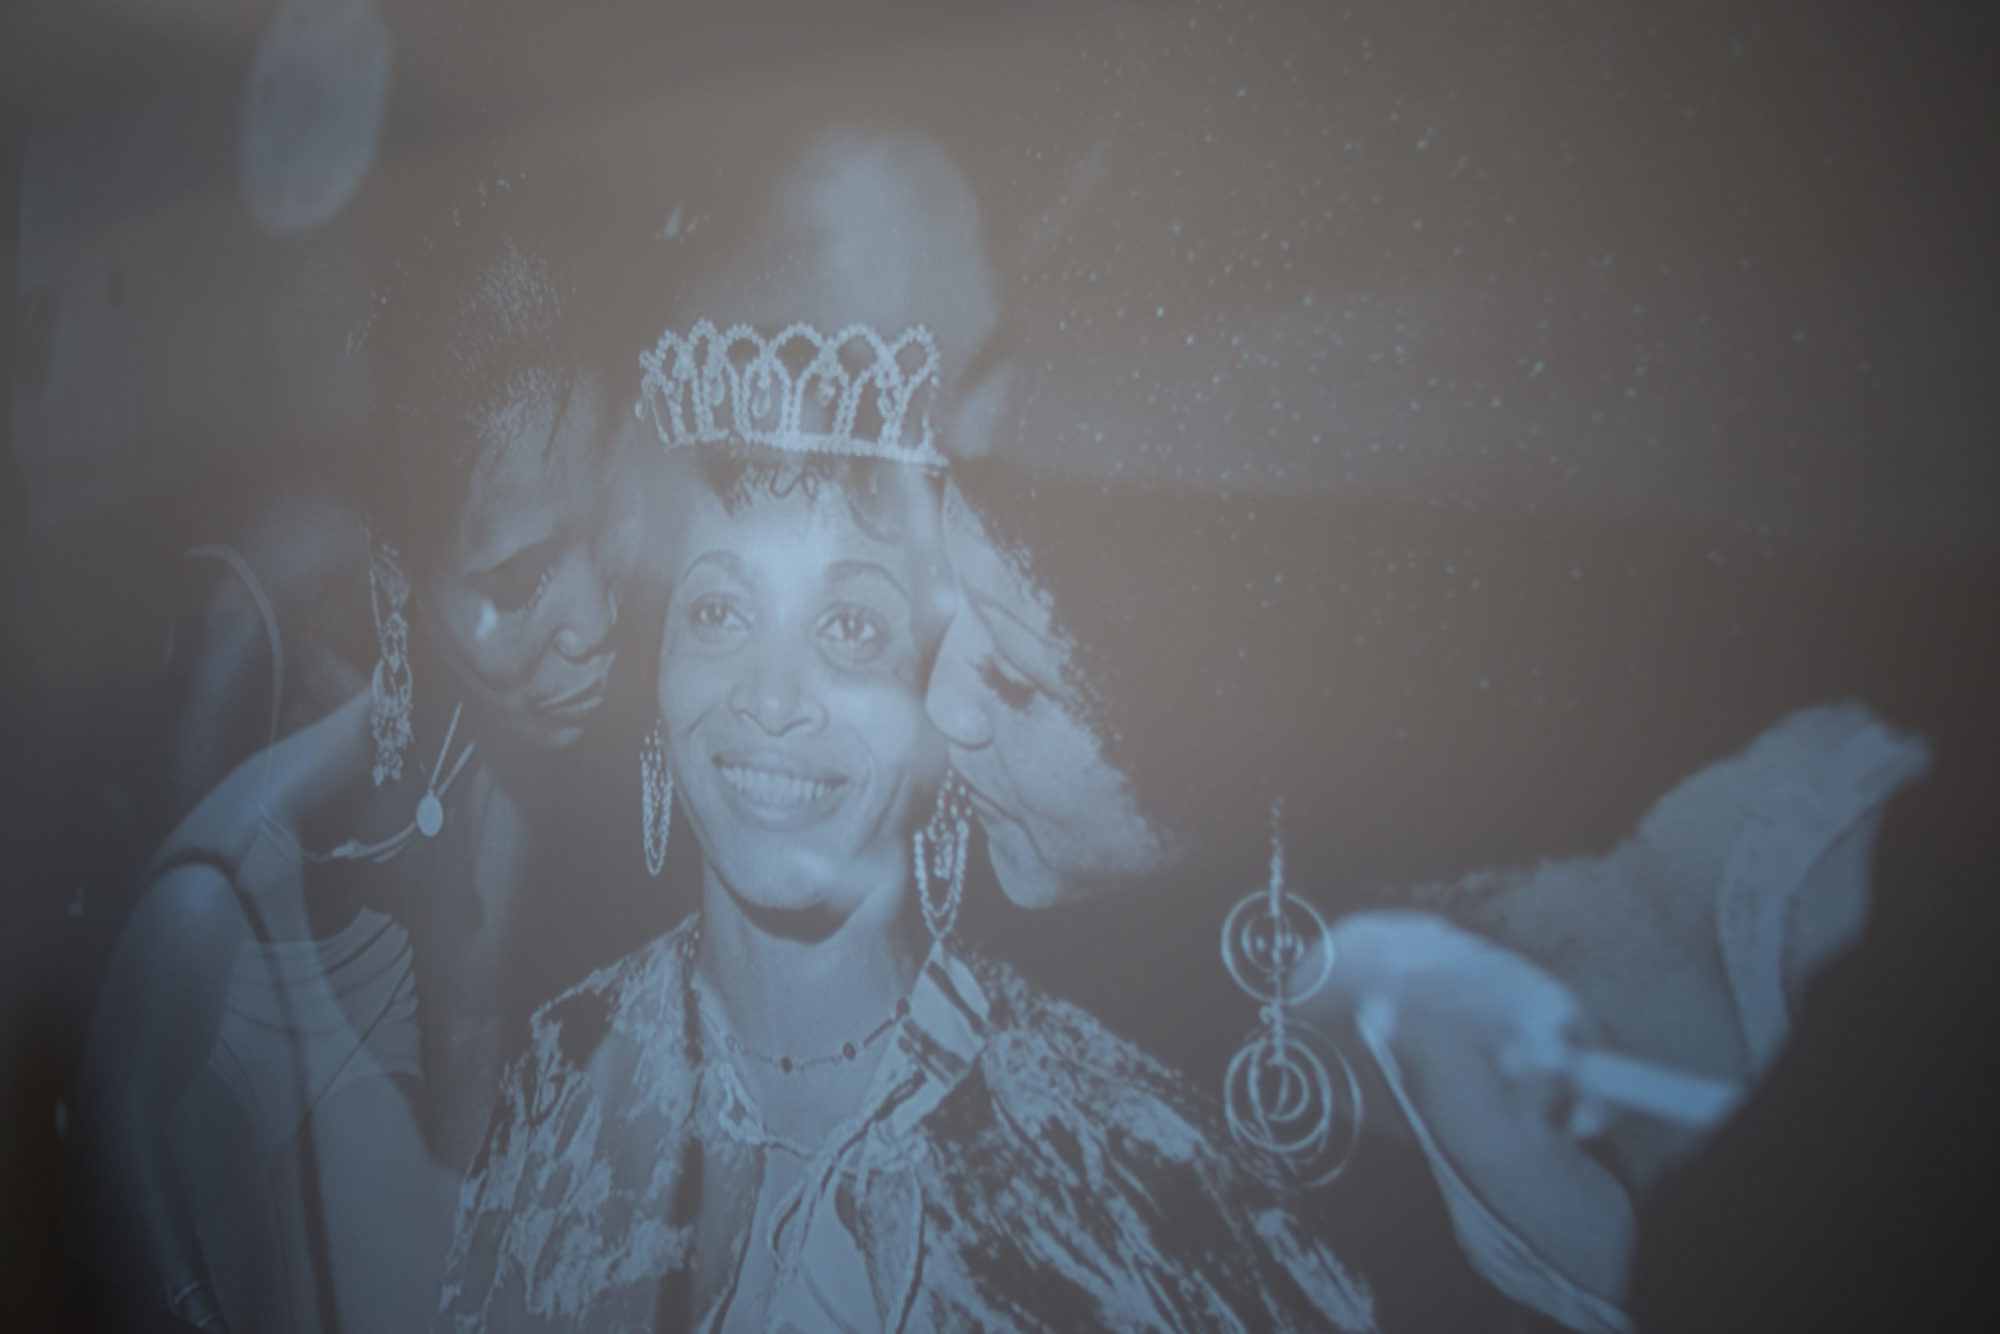 A still from a black and white video projection featuring a three people standing close together. The middle person is wearing an elaborate hairpiece and earrings. The two other people are turned towards the middle figure with eyes closed, leaning slightly inward.